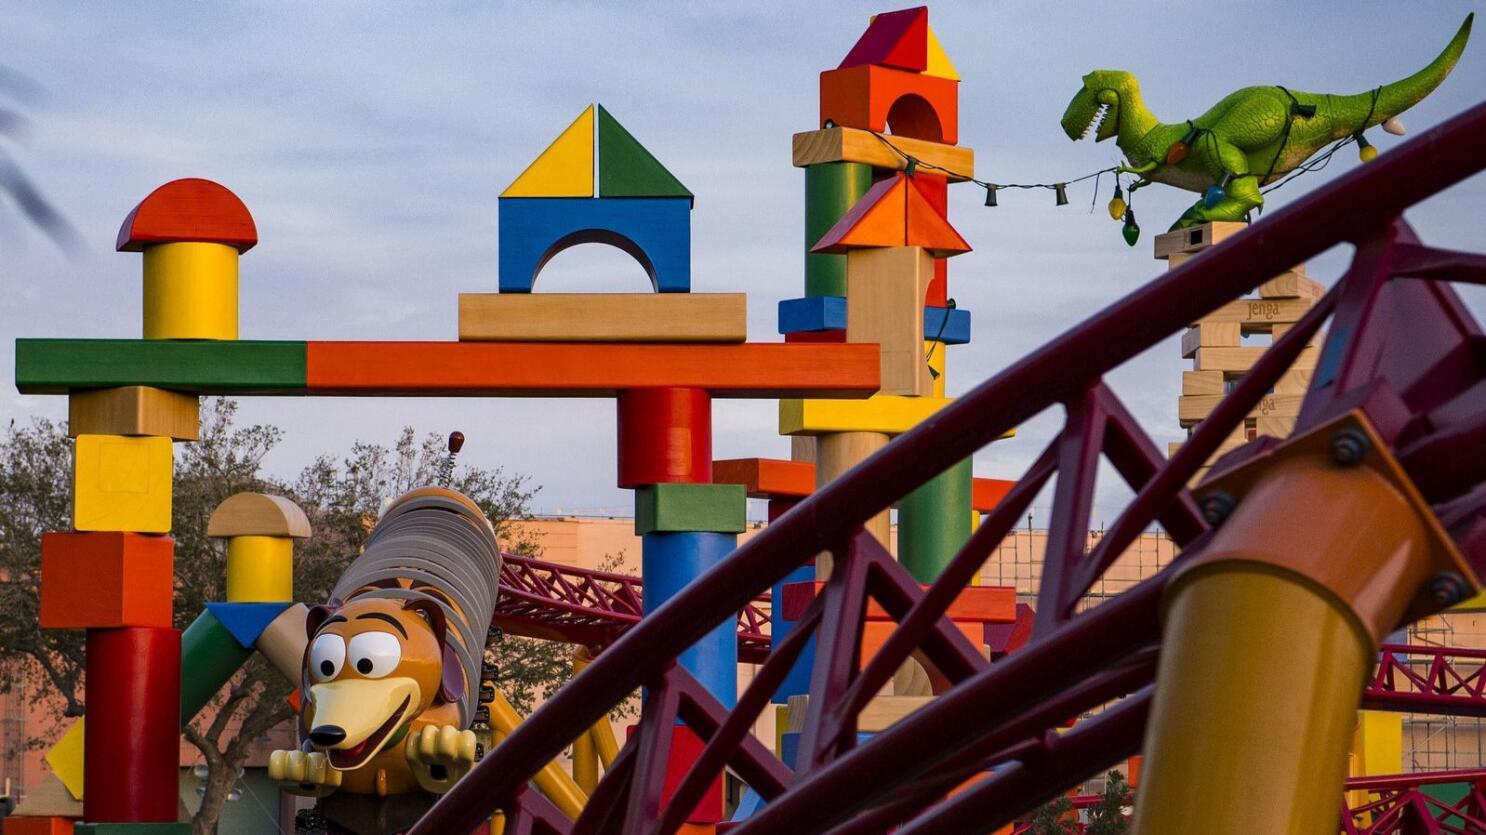 Guide to Toy Story Land at Disney World